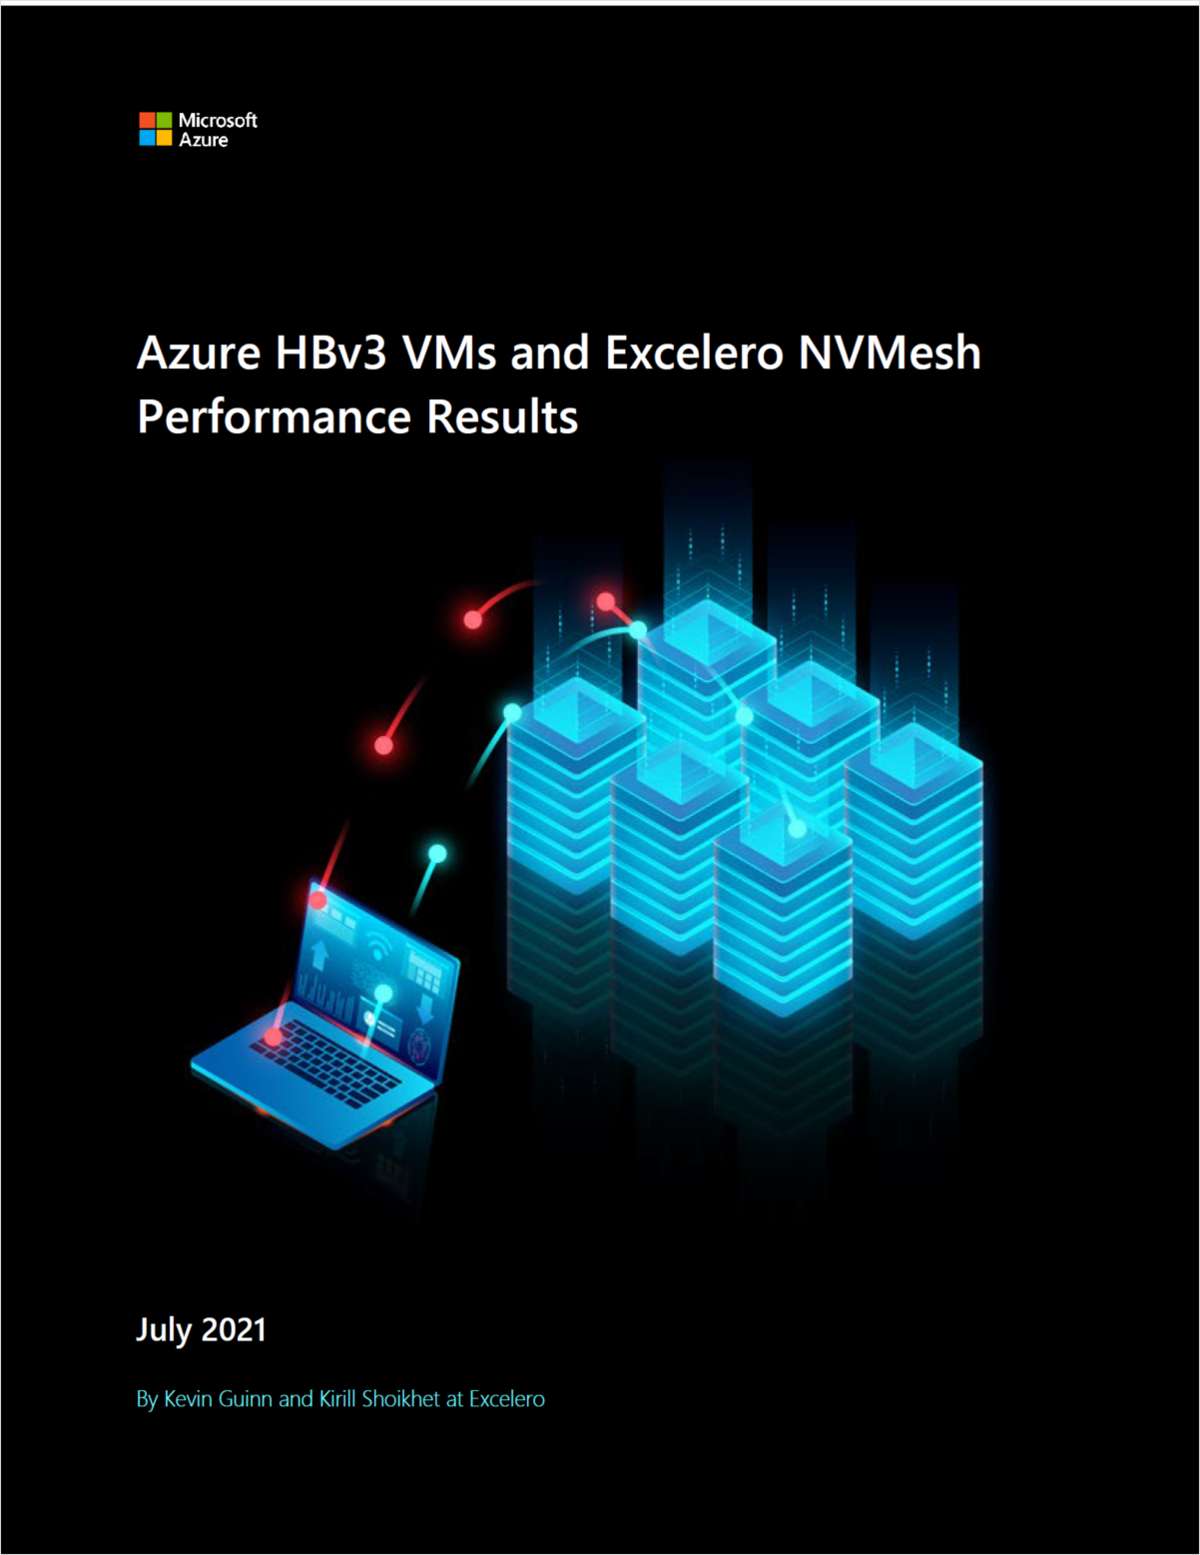 Azure HBv3 VMs and Excelero NVMesh Performance Results